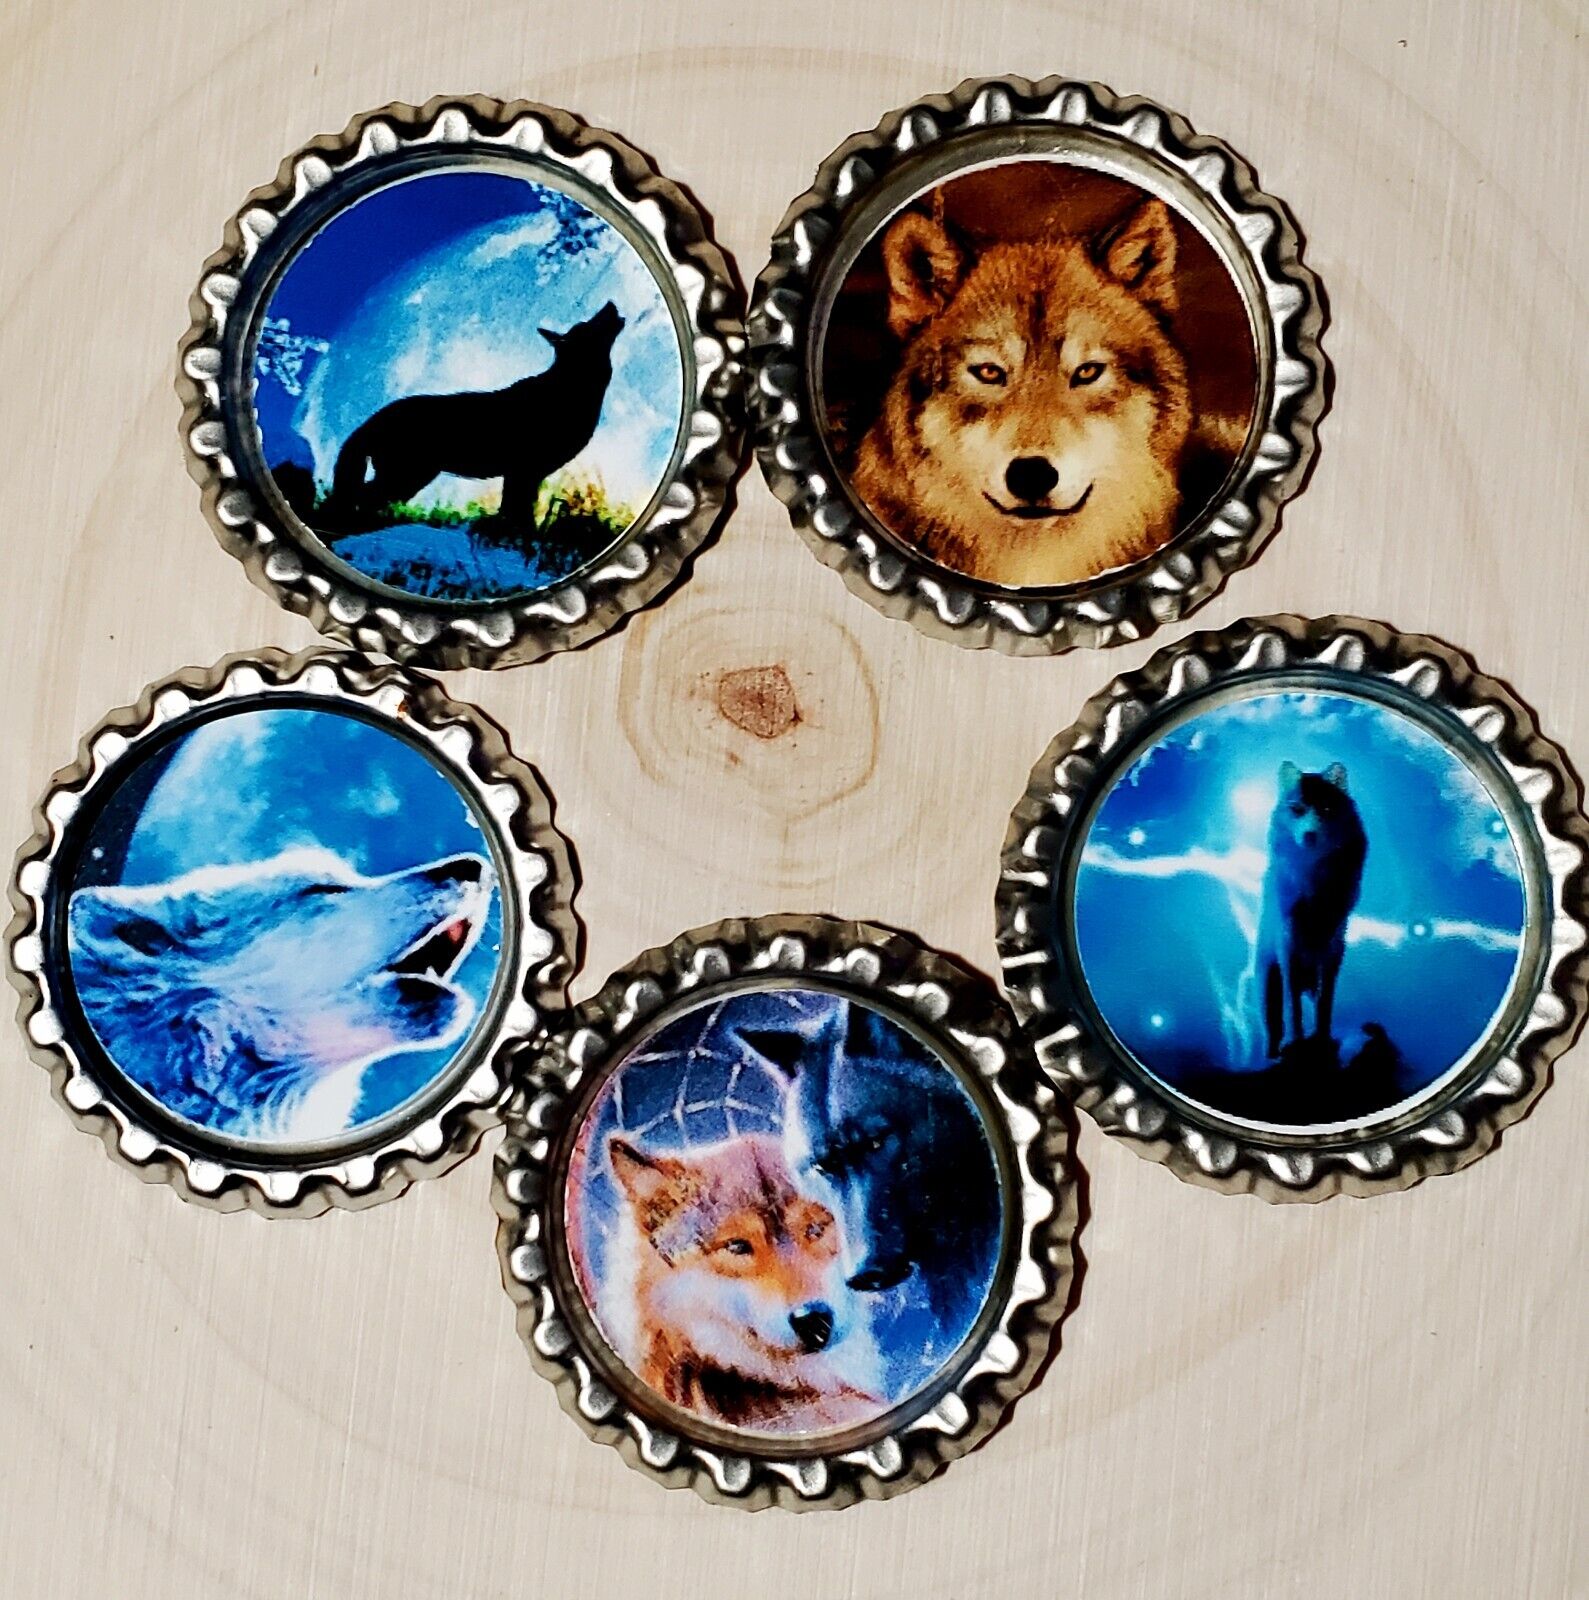 Gorgeous Wolves One Inch Bottle Cap Refrigerator Magnet Set of Five